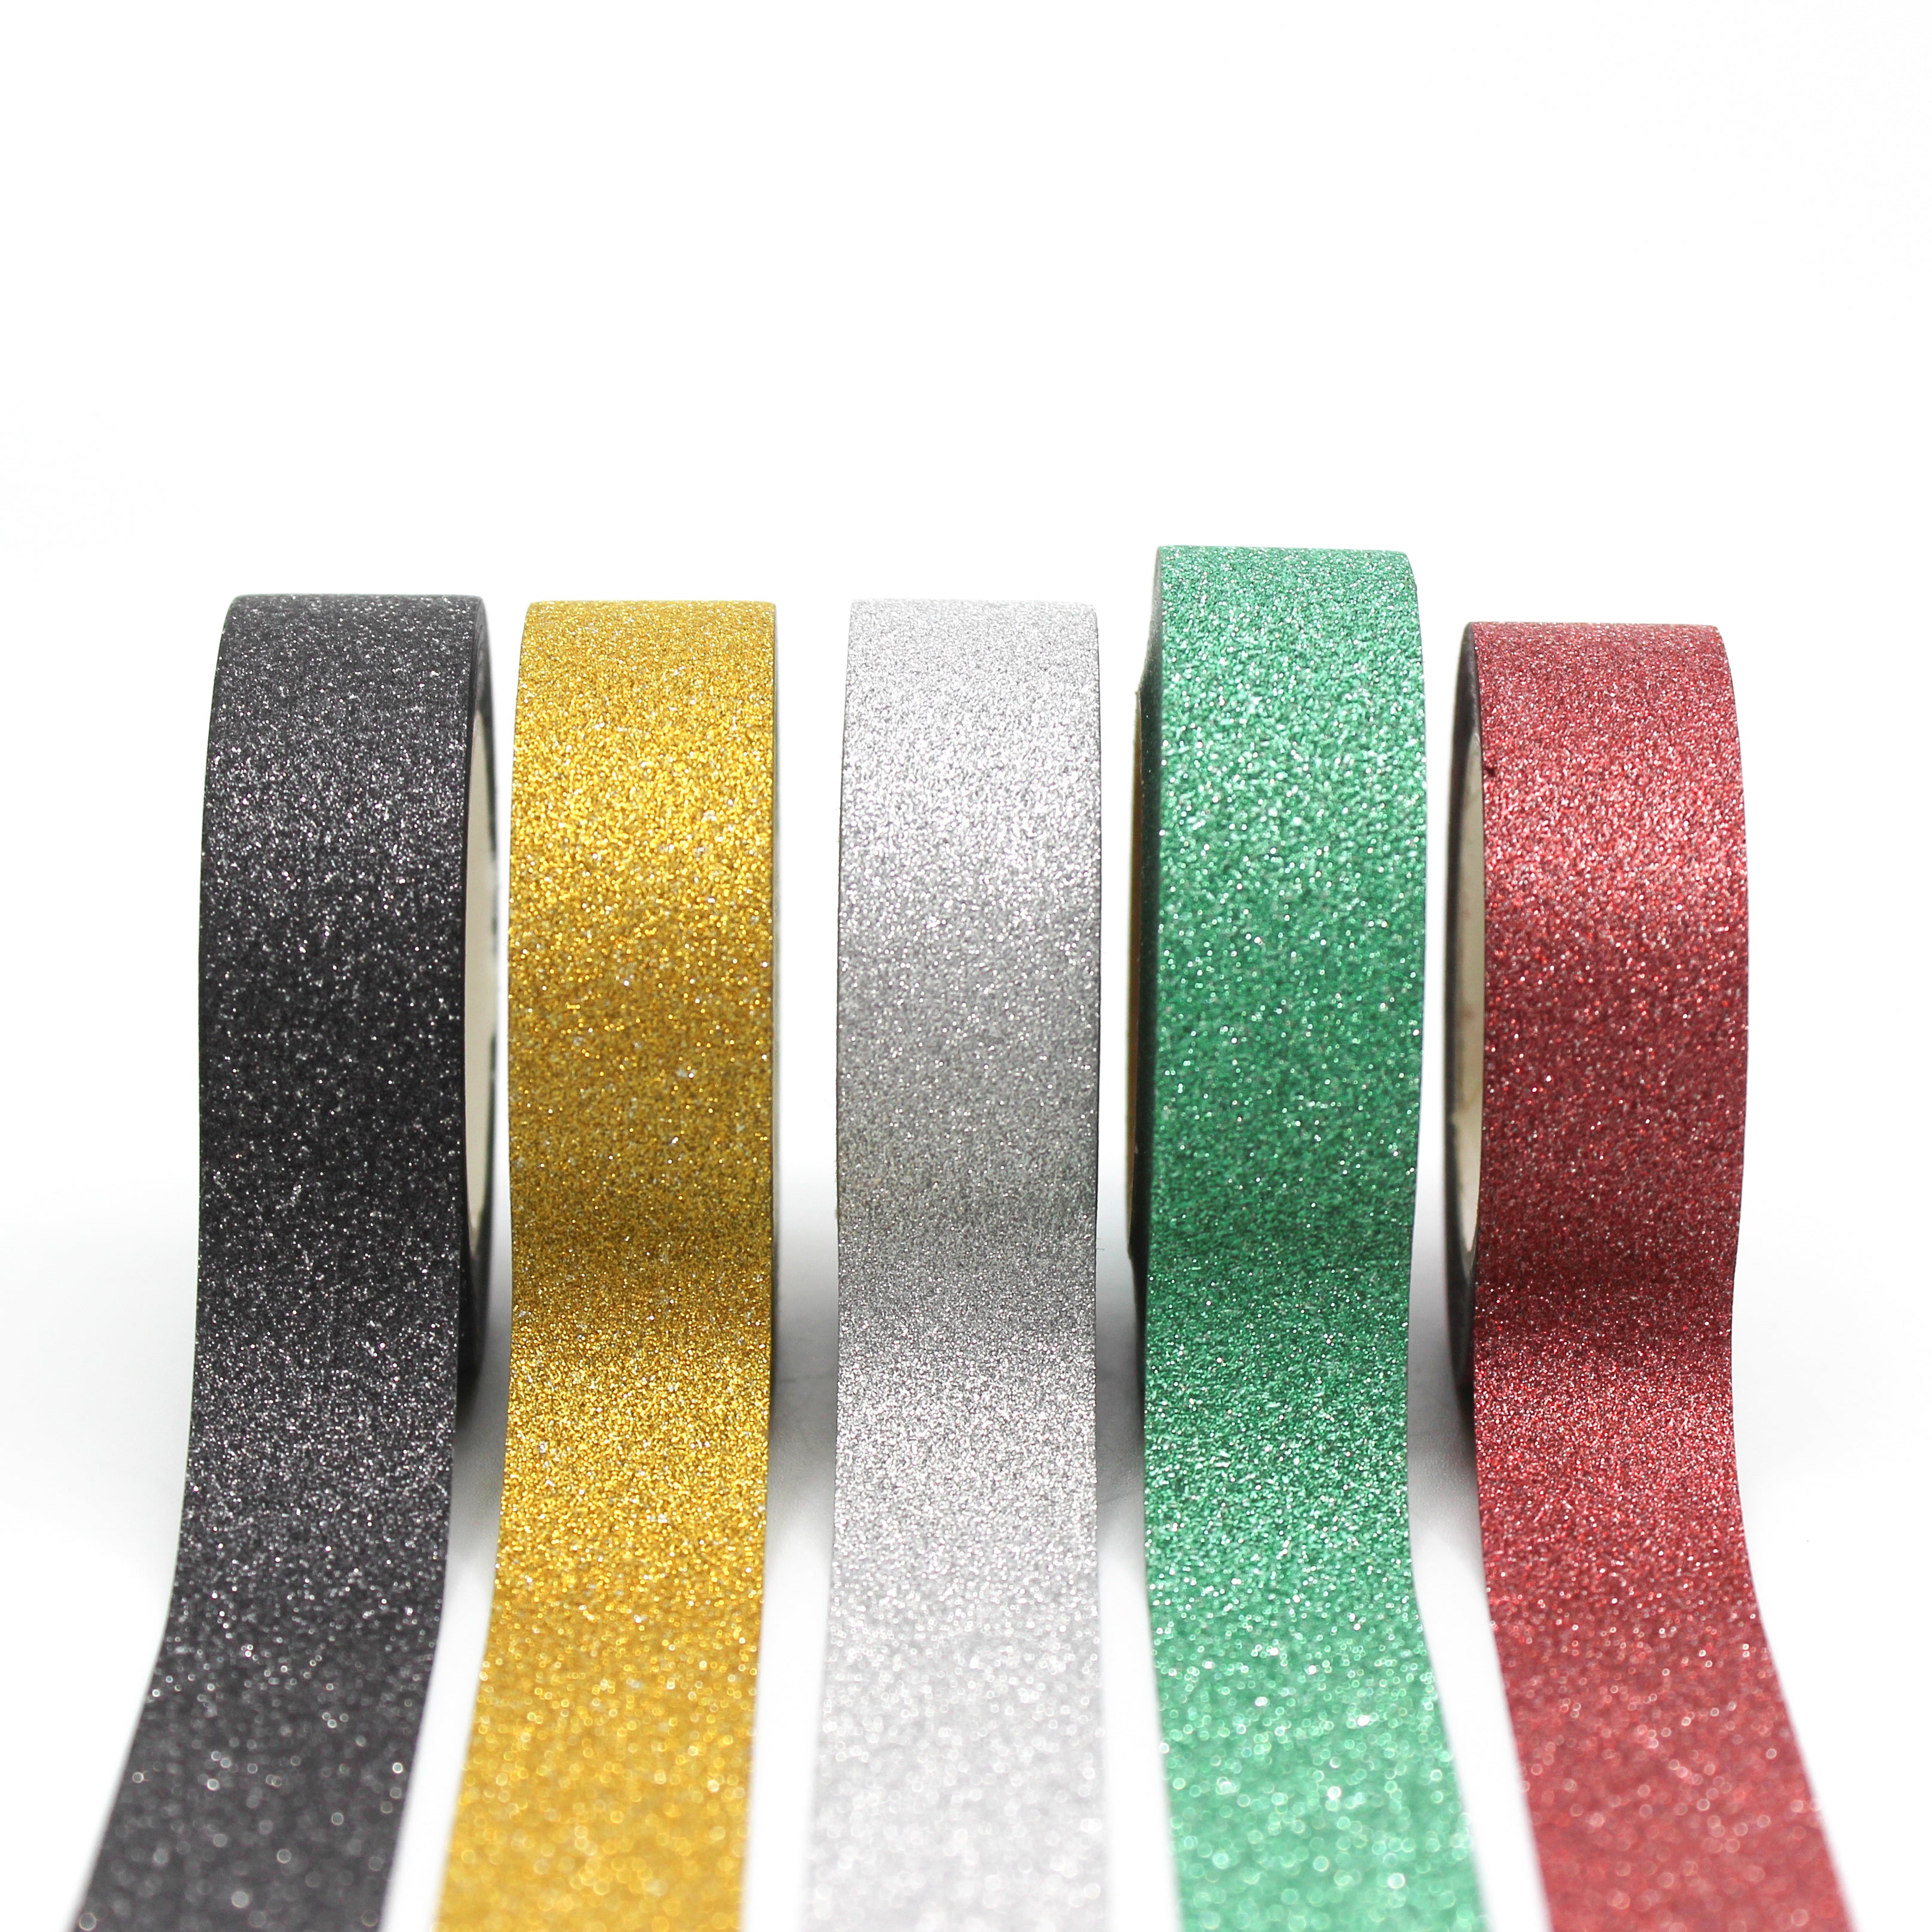 Add sparkle and shine to your winter crafts with these glitter tapes. Perfect for adding a festive touch to cards, scrapbooks, or gift wrapping. These glitter tapes are sold in green, black, silver, Gold, and Dark Red. You can buy them at BBB Supplies Craft Shop.